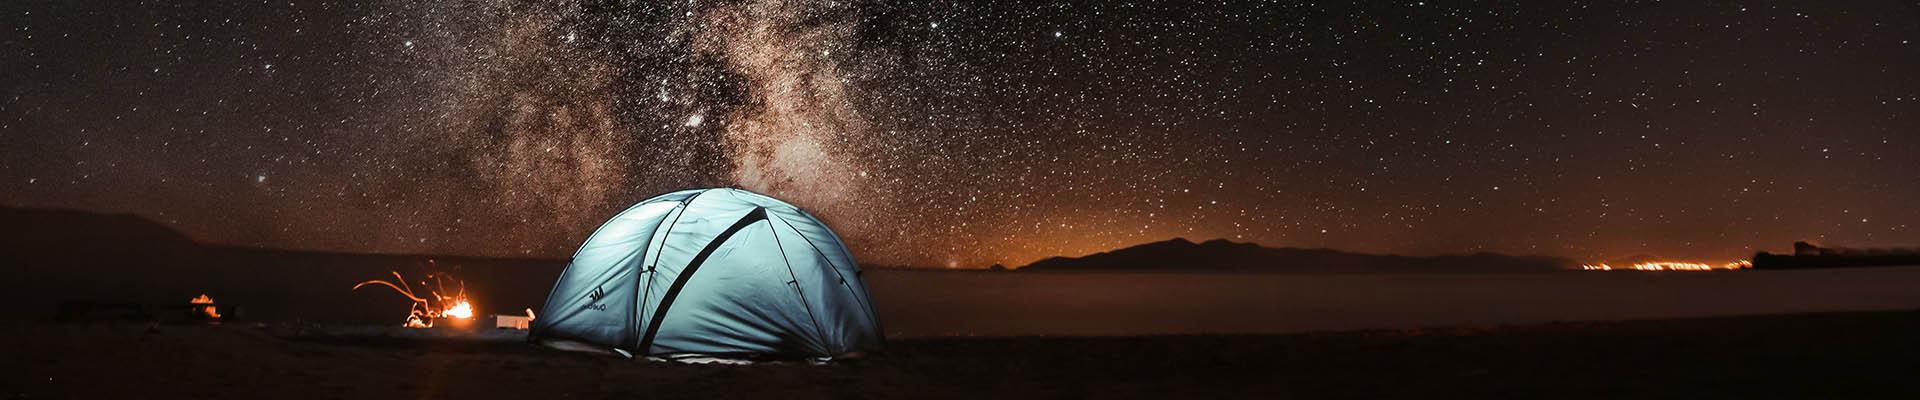 A blue tent out it the desert under a starry nigh